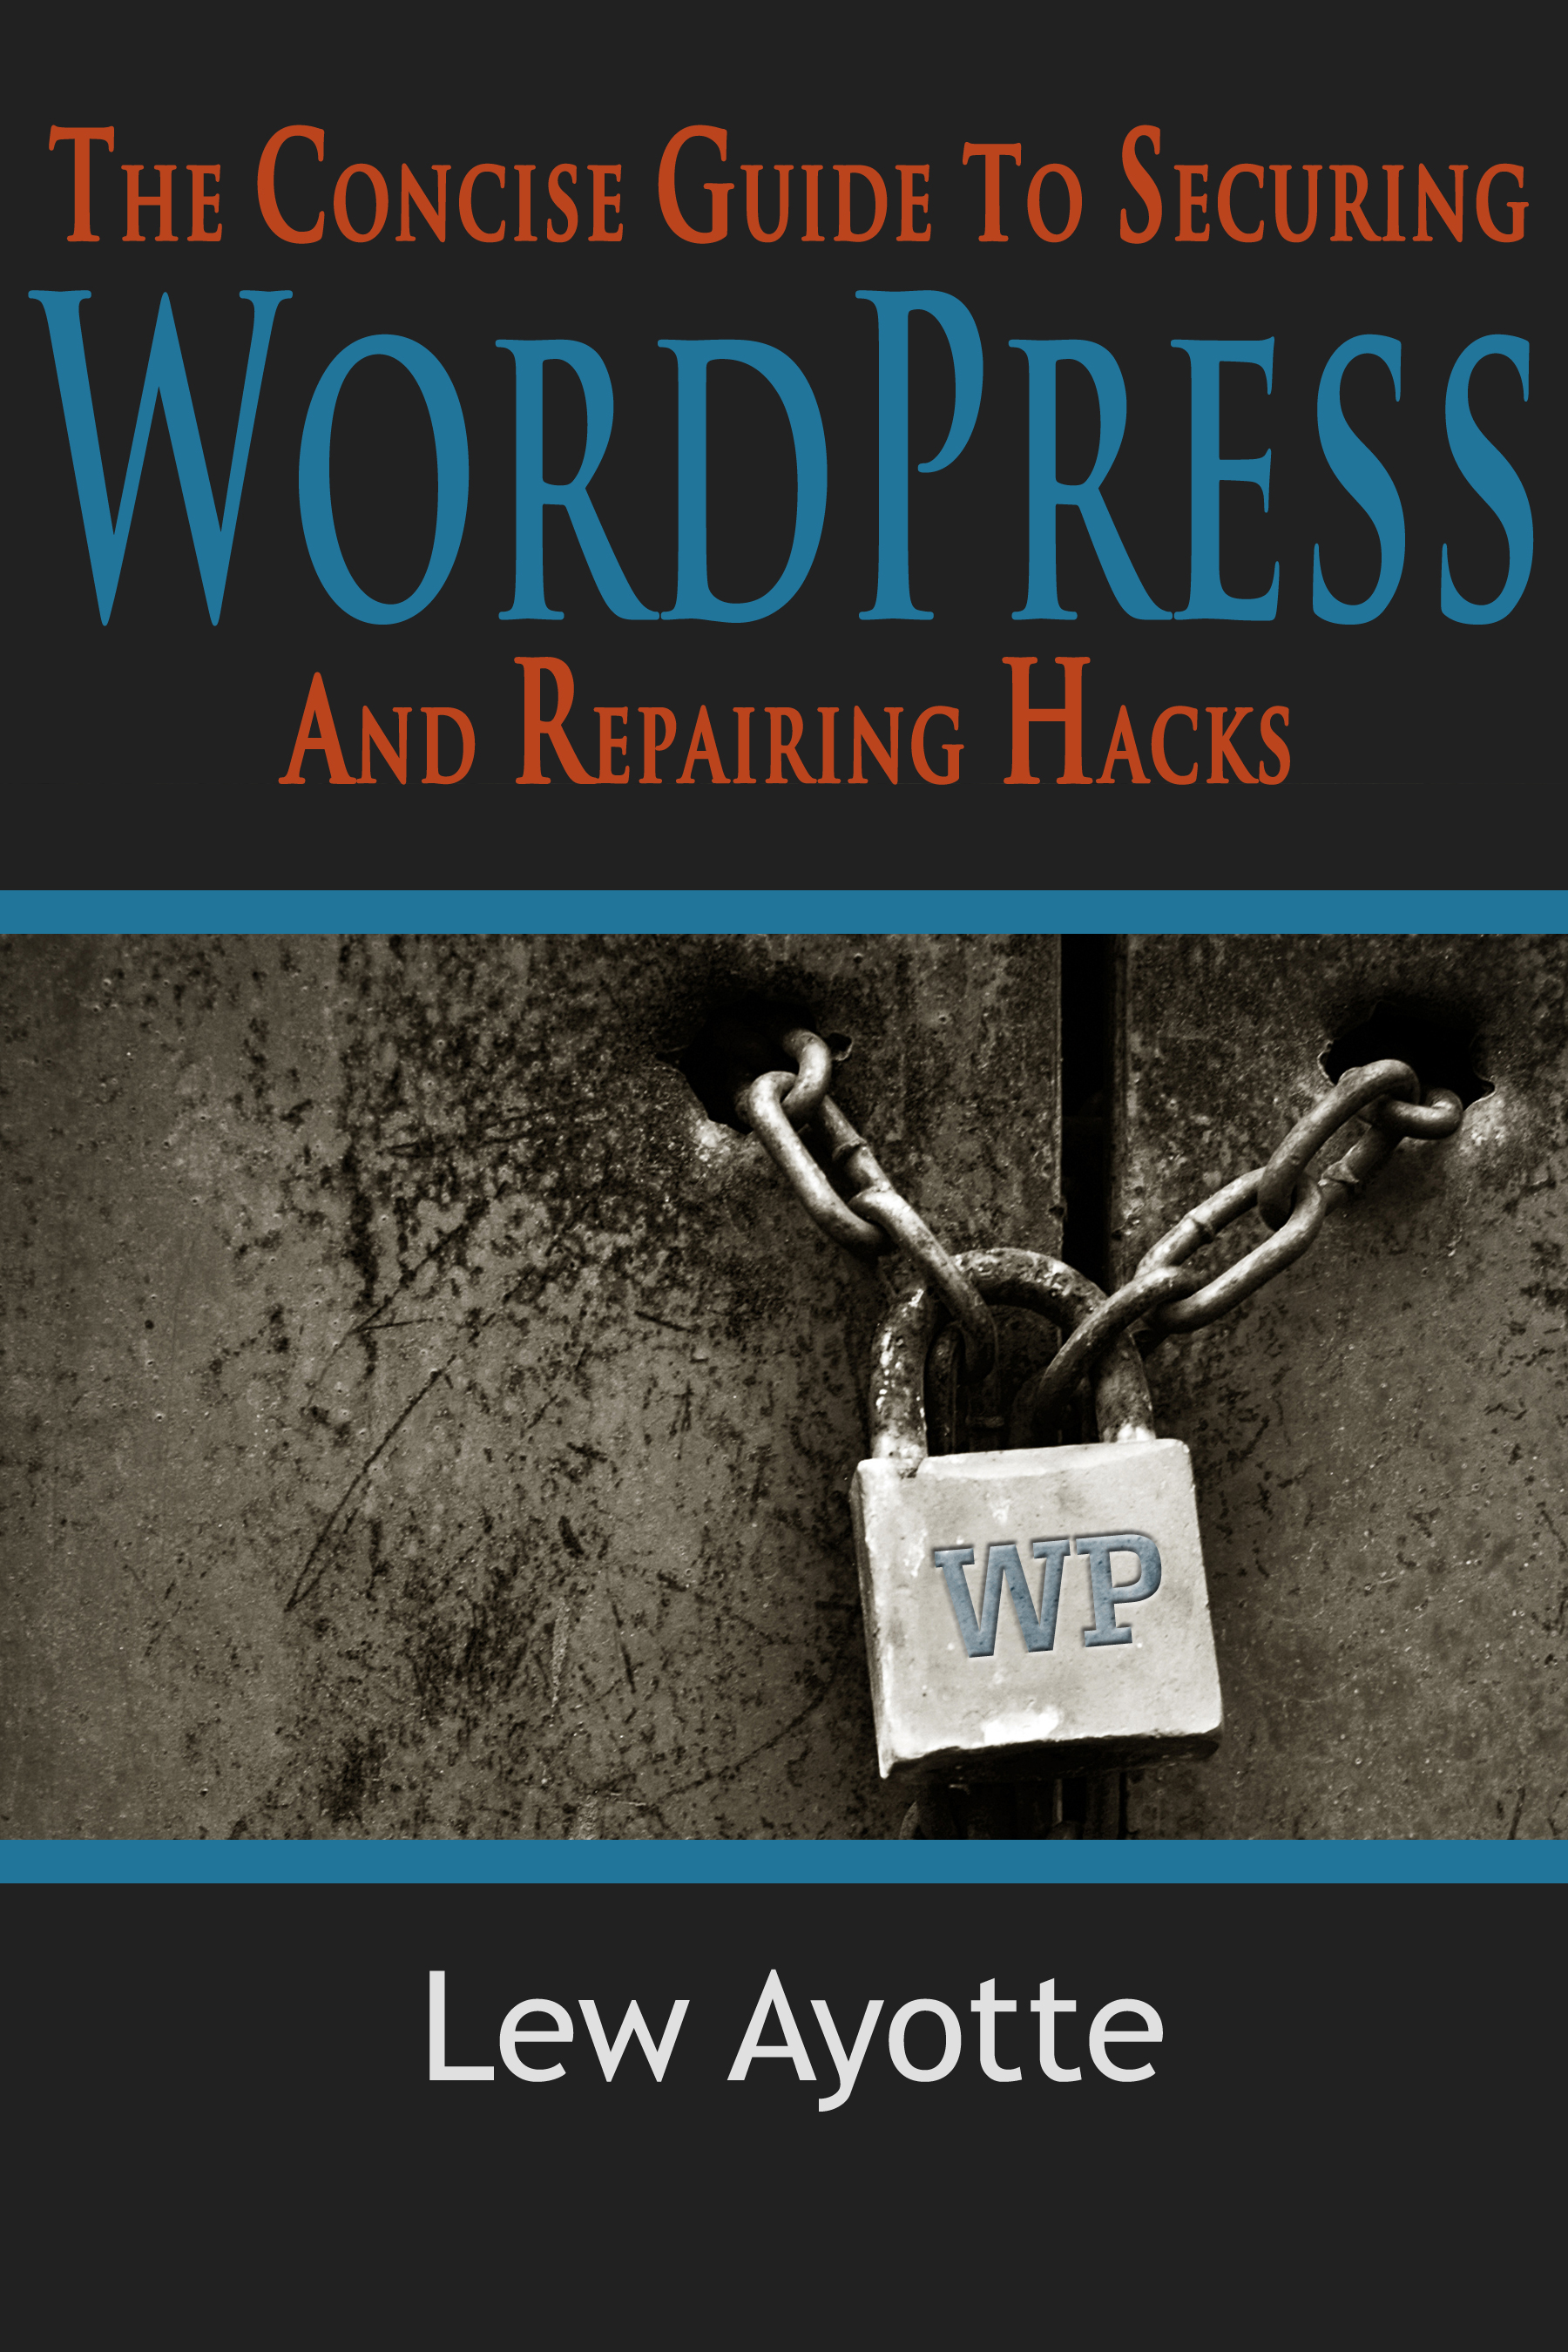 The Concise Guide to Securing WordPress and Repairing Hacks – Now Available